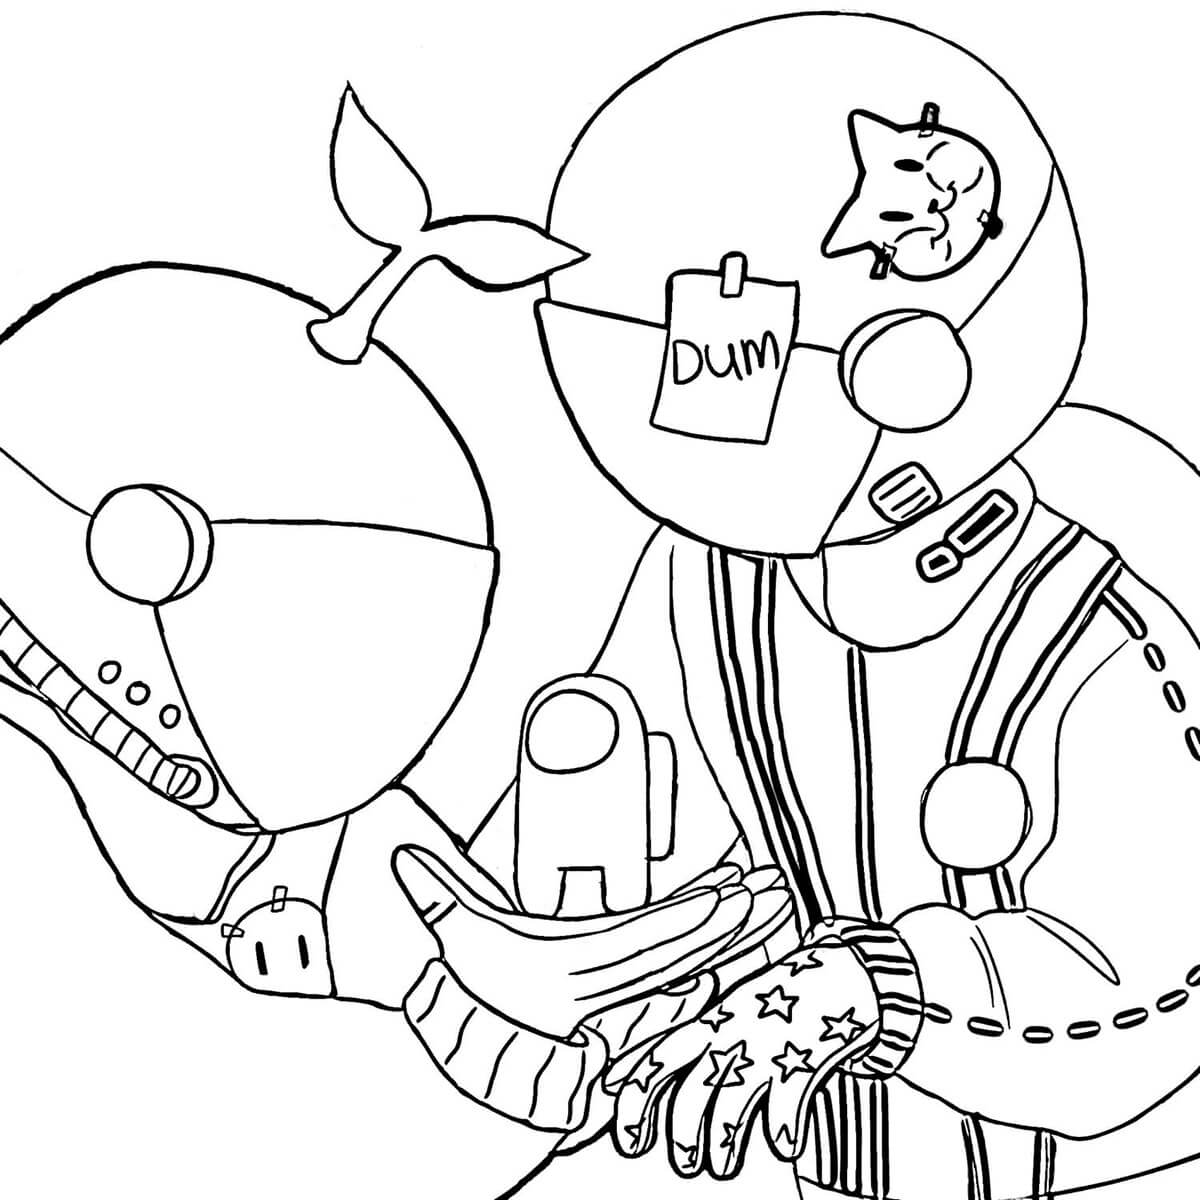 Among Us Imposter Coloring Page - Free Printable Coloring ...